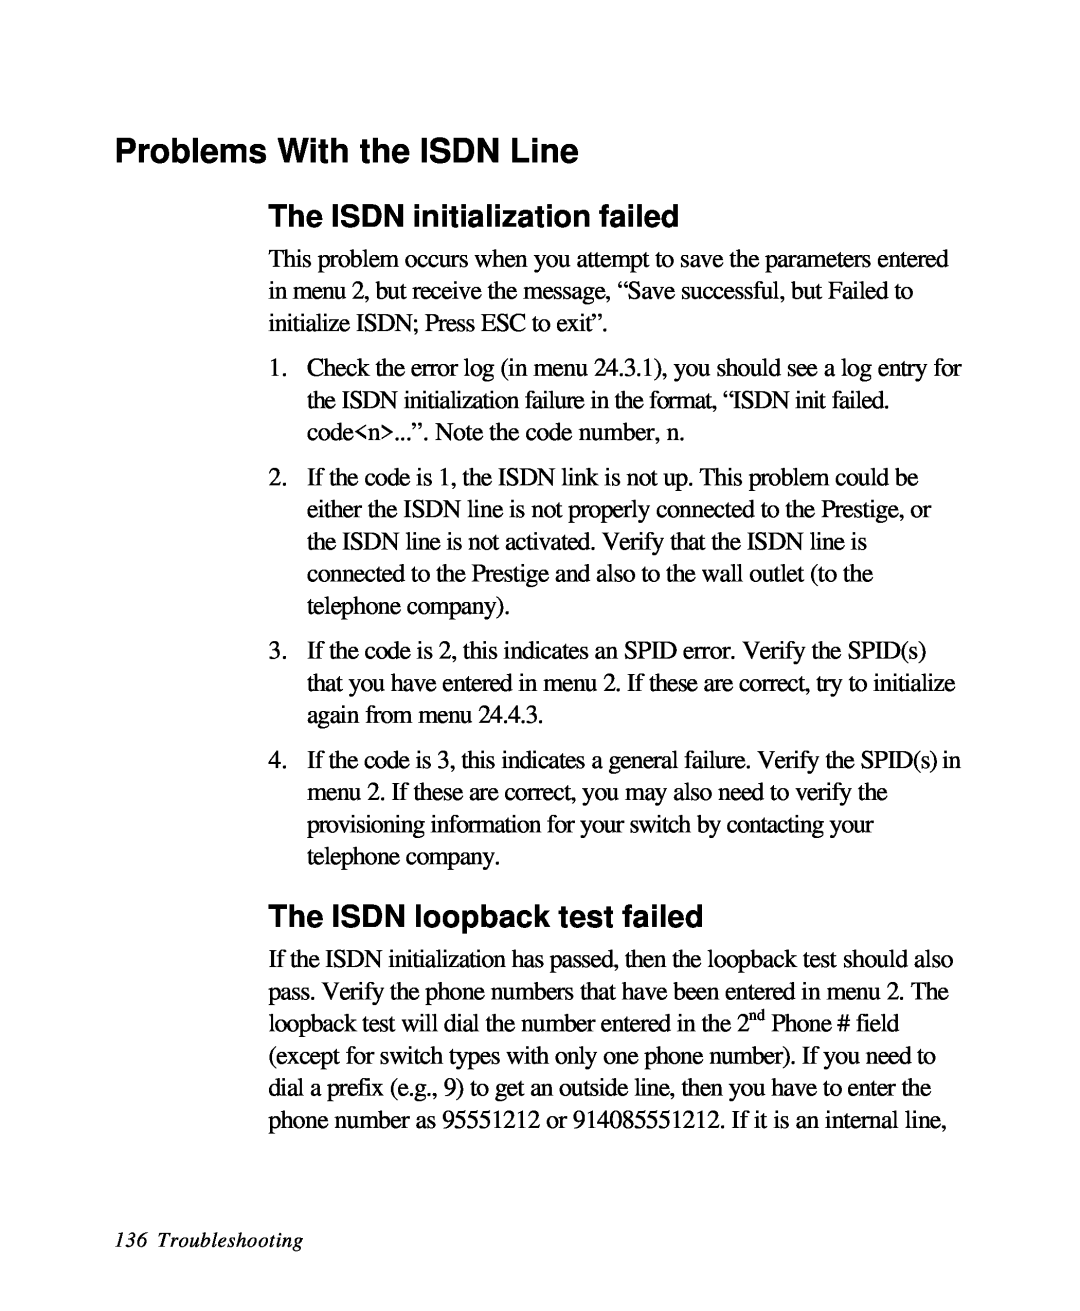 ZyXEL Communications 28641 Problems With the ISDN Line, The ISDN initialization failed, The ISDN loopback test failed 